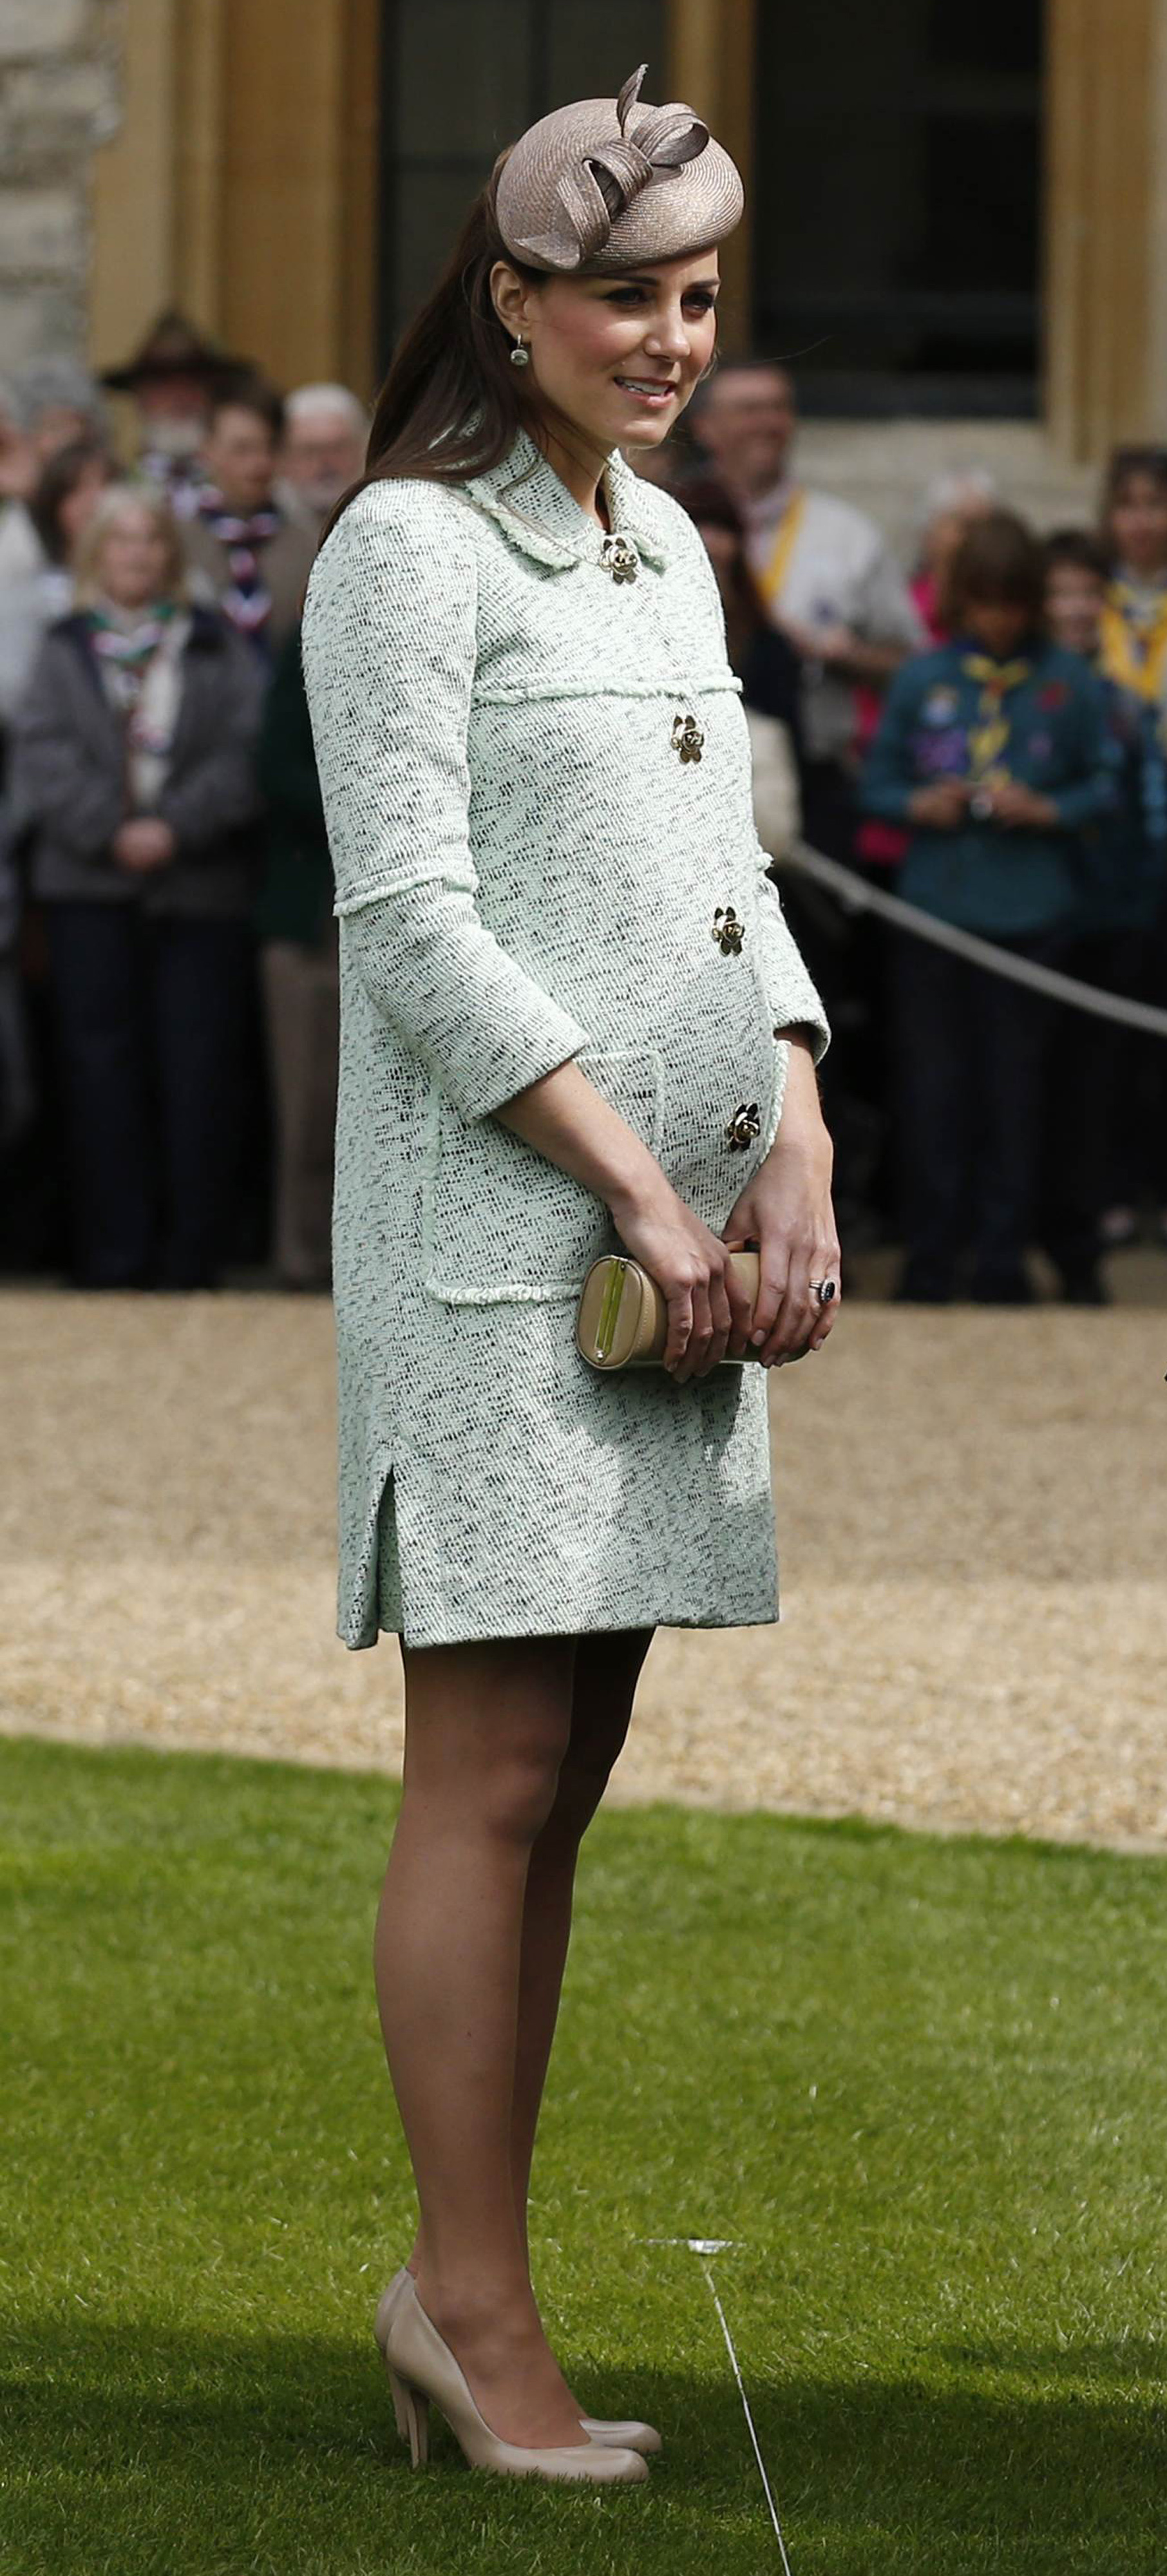 Catherine, Duchess of Cambridge during the National Review of Queen's Scouts at Windsor Castle in Berkshire on April 21, 2013.